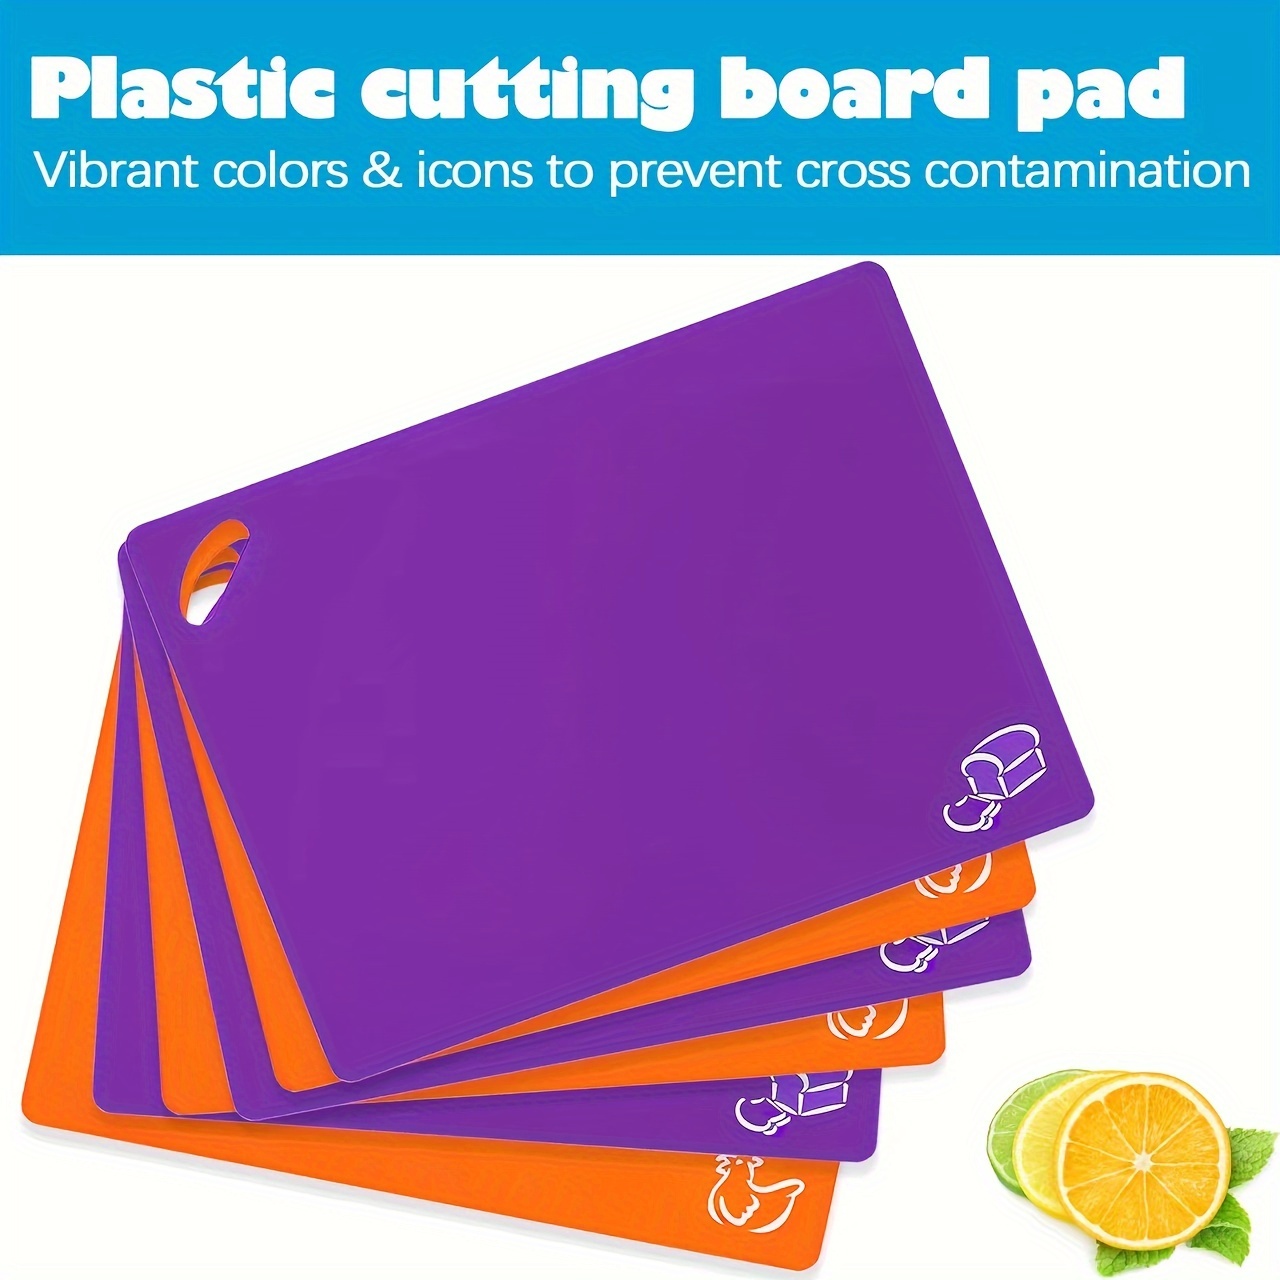 Cutting Board Mats Set Extra Thick Flexible Plastic Kitchen Chopping Board  Color